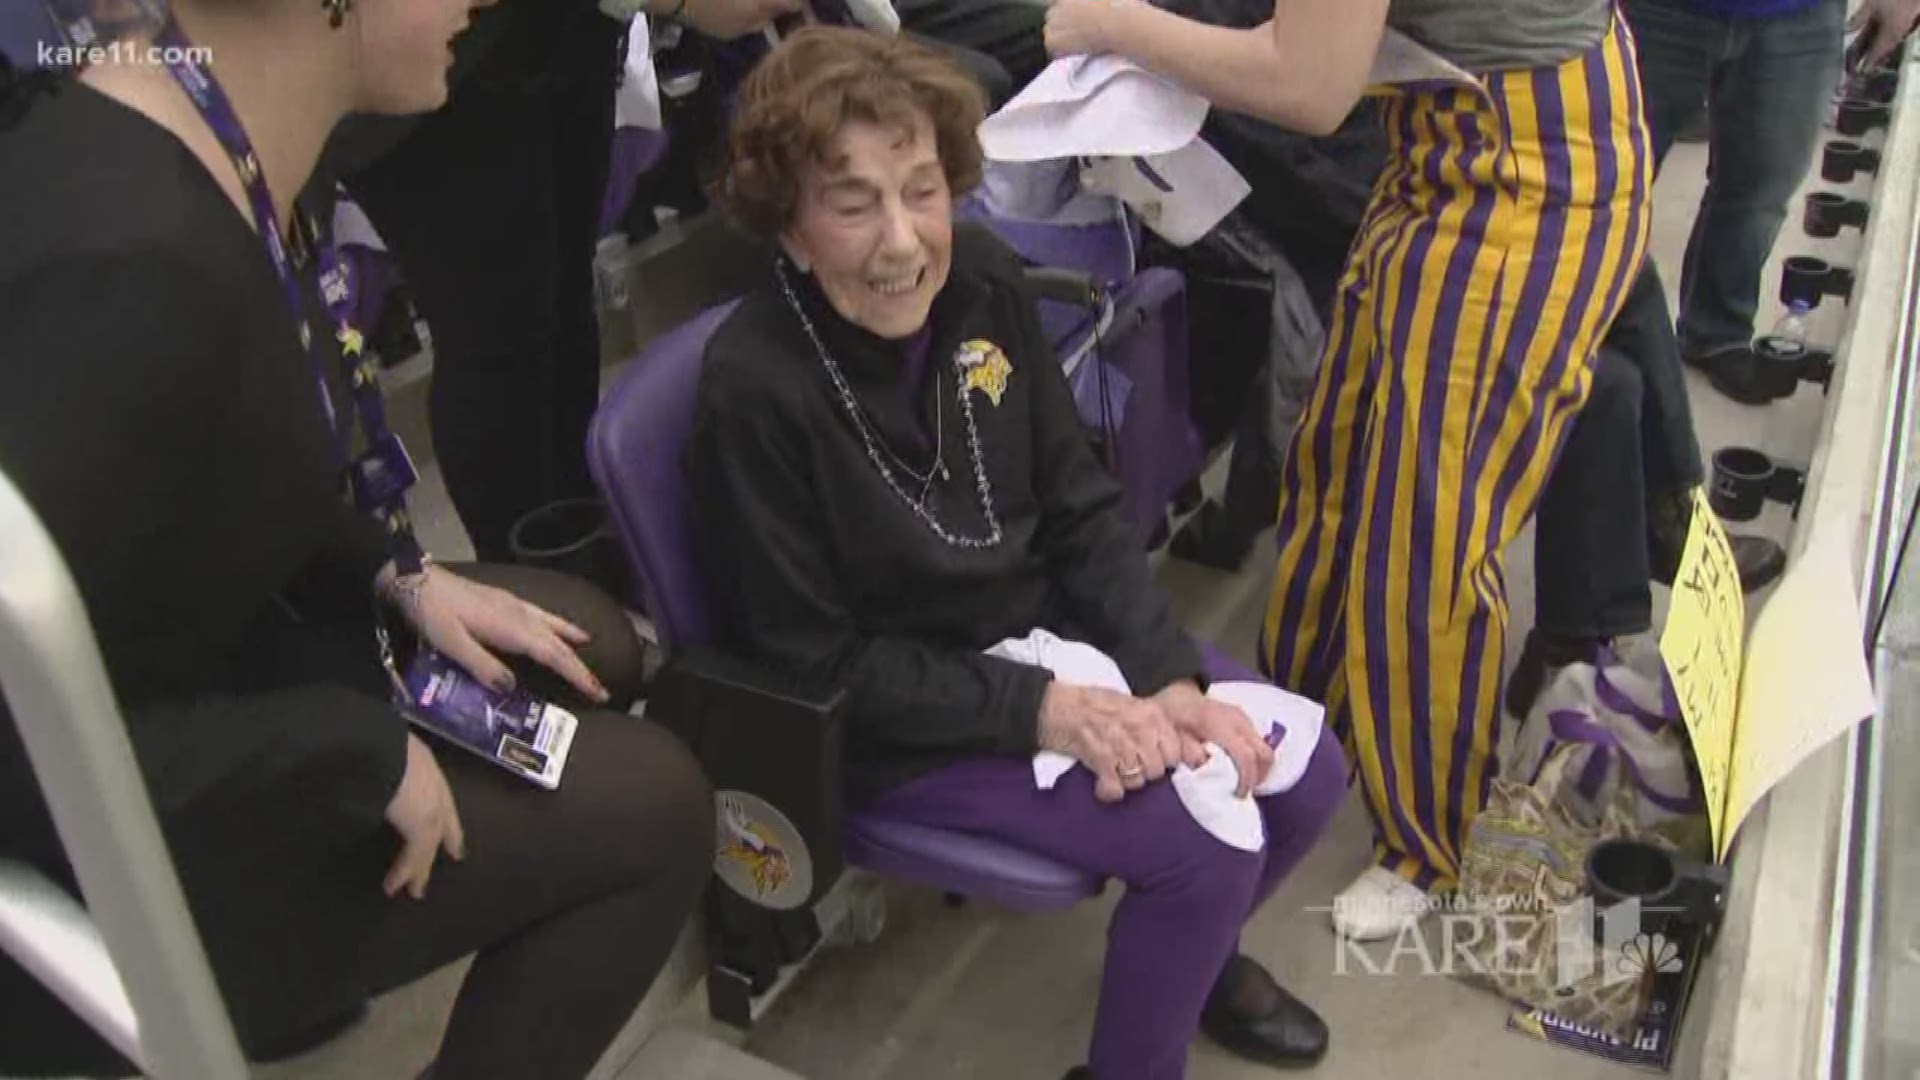 Ninety-nine-year-old Millie Wall saw a pretty epic ending at her first Vikings game. Now, she's been given tickets to the Super Bowl. http://kare11.tv/2mDJRmb